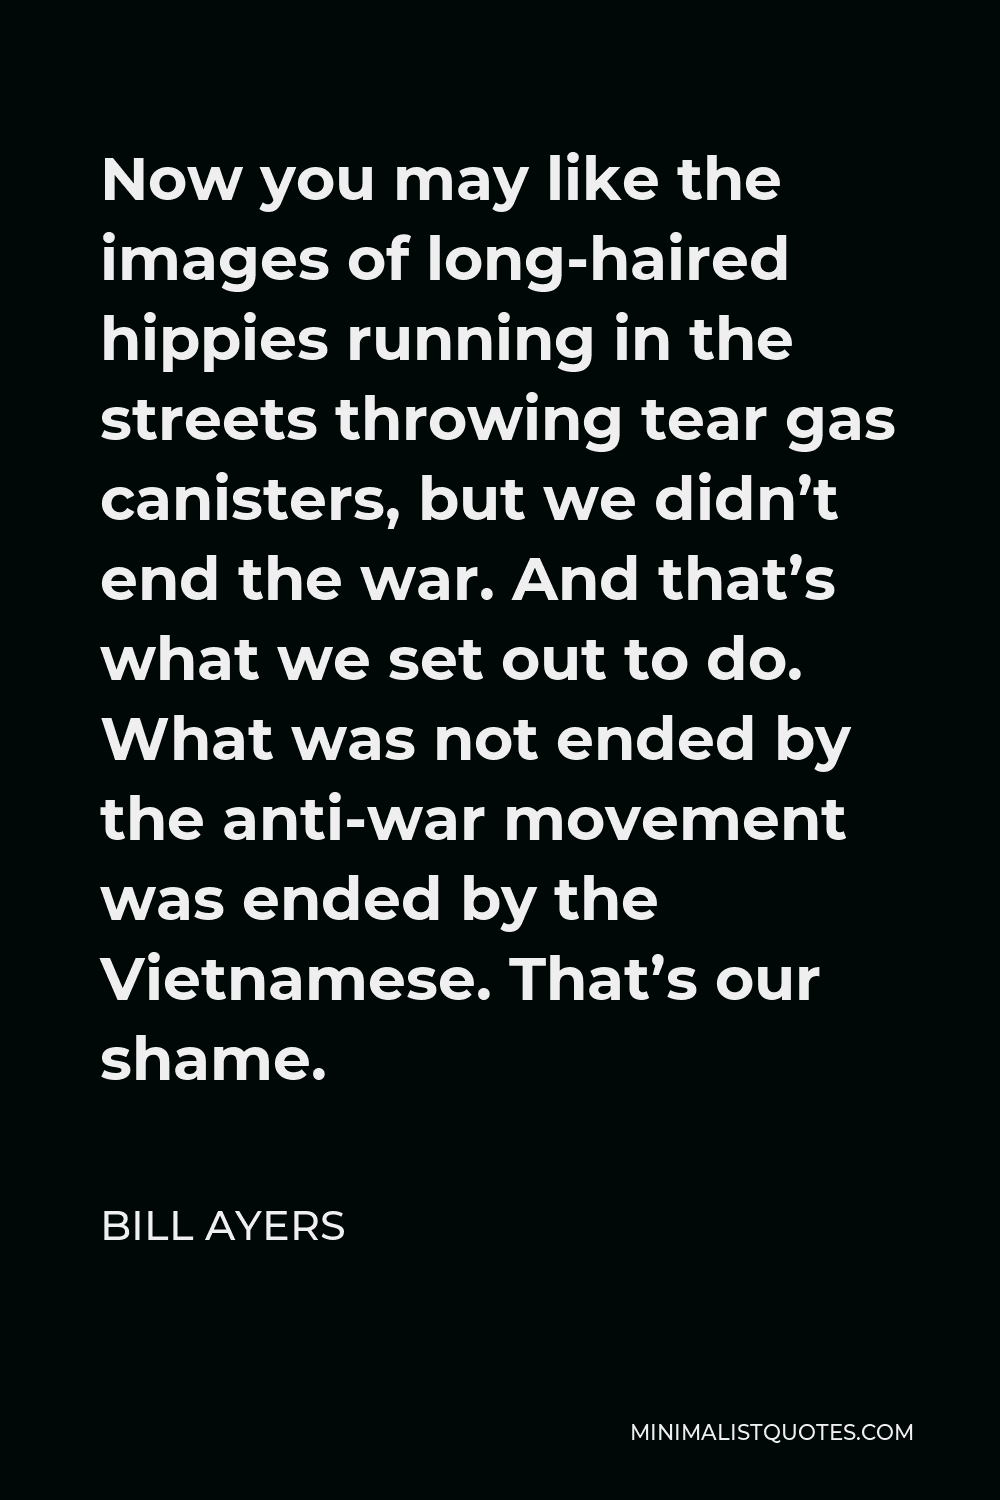 Bill Ayers Quote - Now you may like the images of long-haired hippies running in the streets throwing tear gas canisters, but we didn’t end the war. And that’s what we set out to do. What was not ended by the anti-war movement was ended by the Vietnamese. That’s our shame.